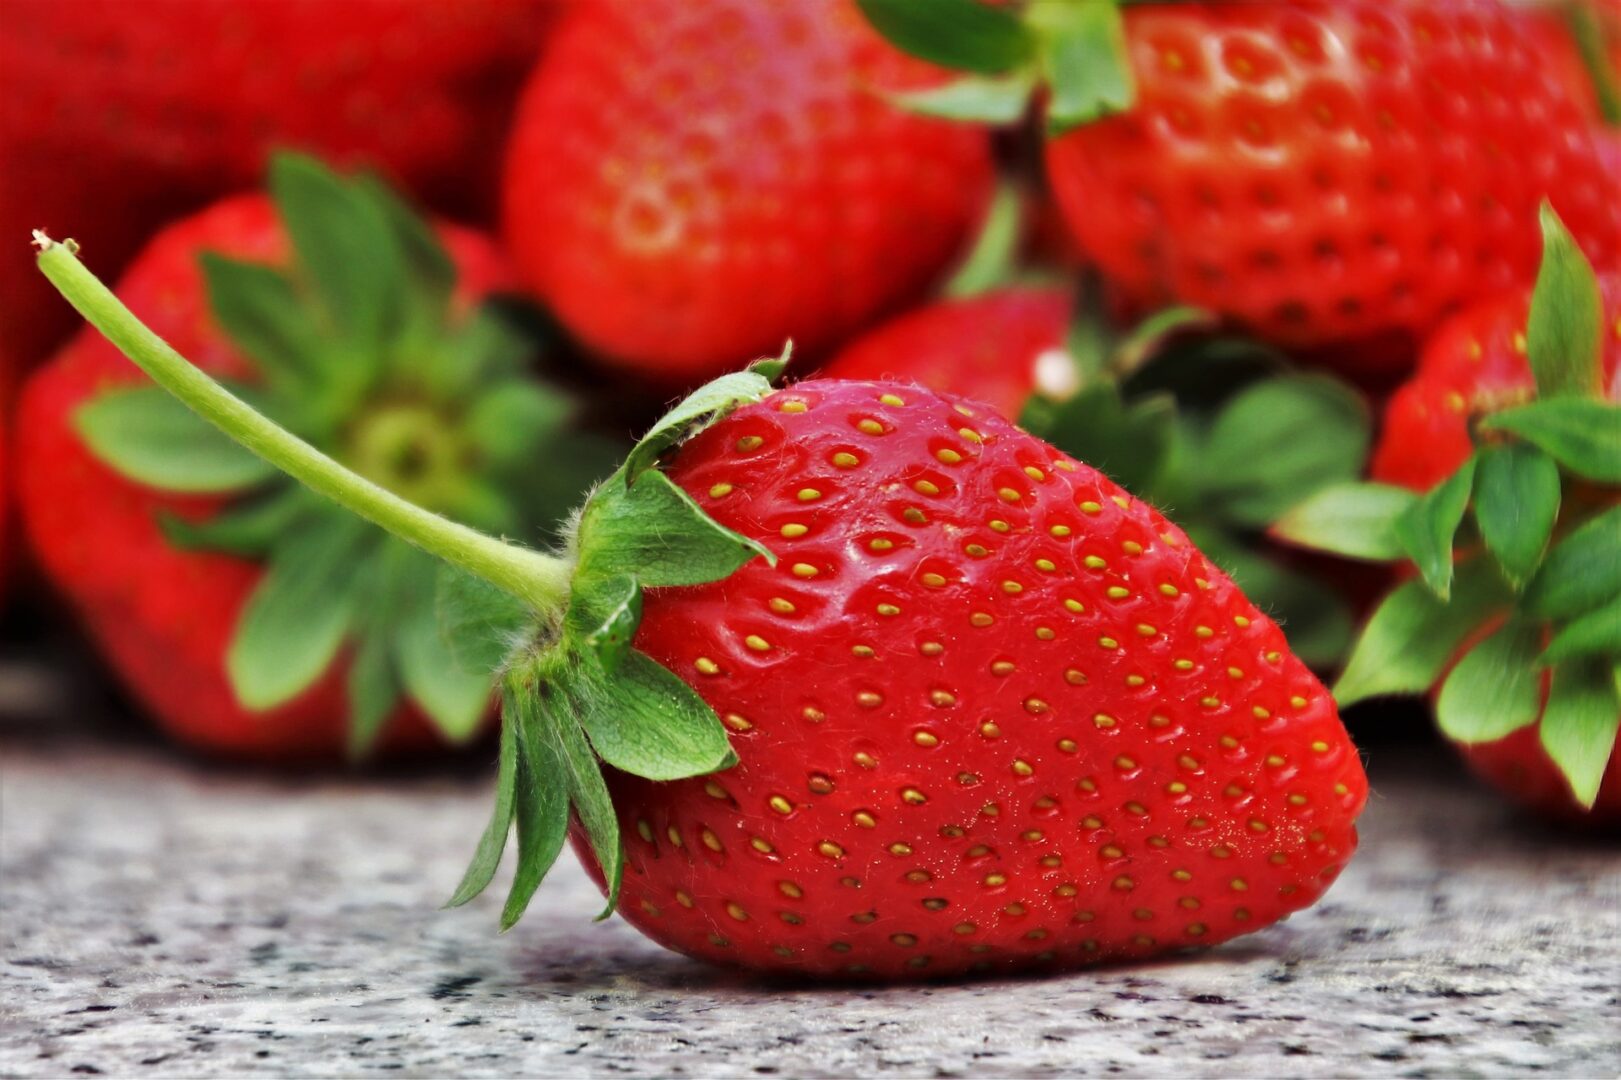 Fresh strawberries for National Strawberry Day